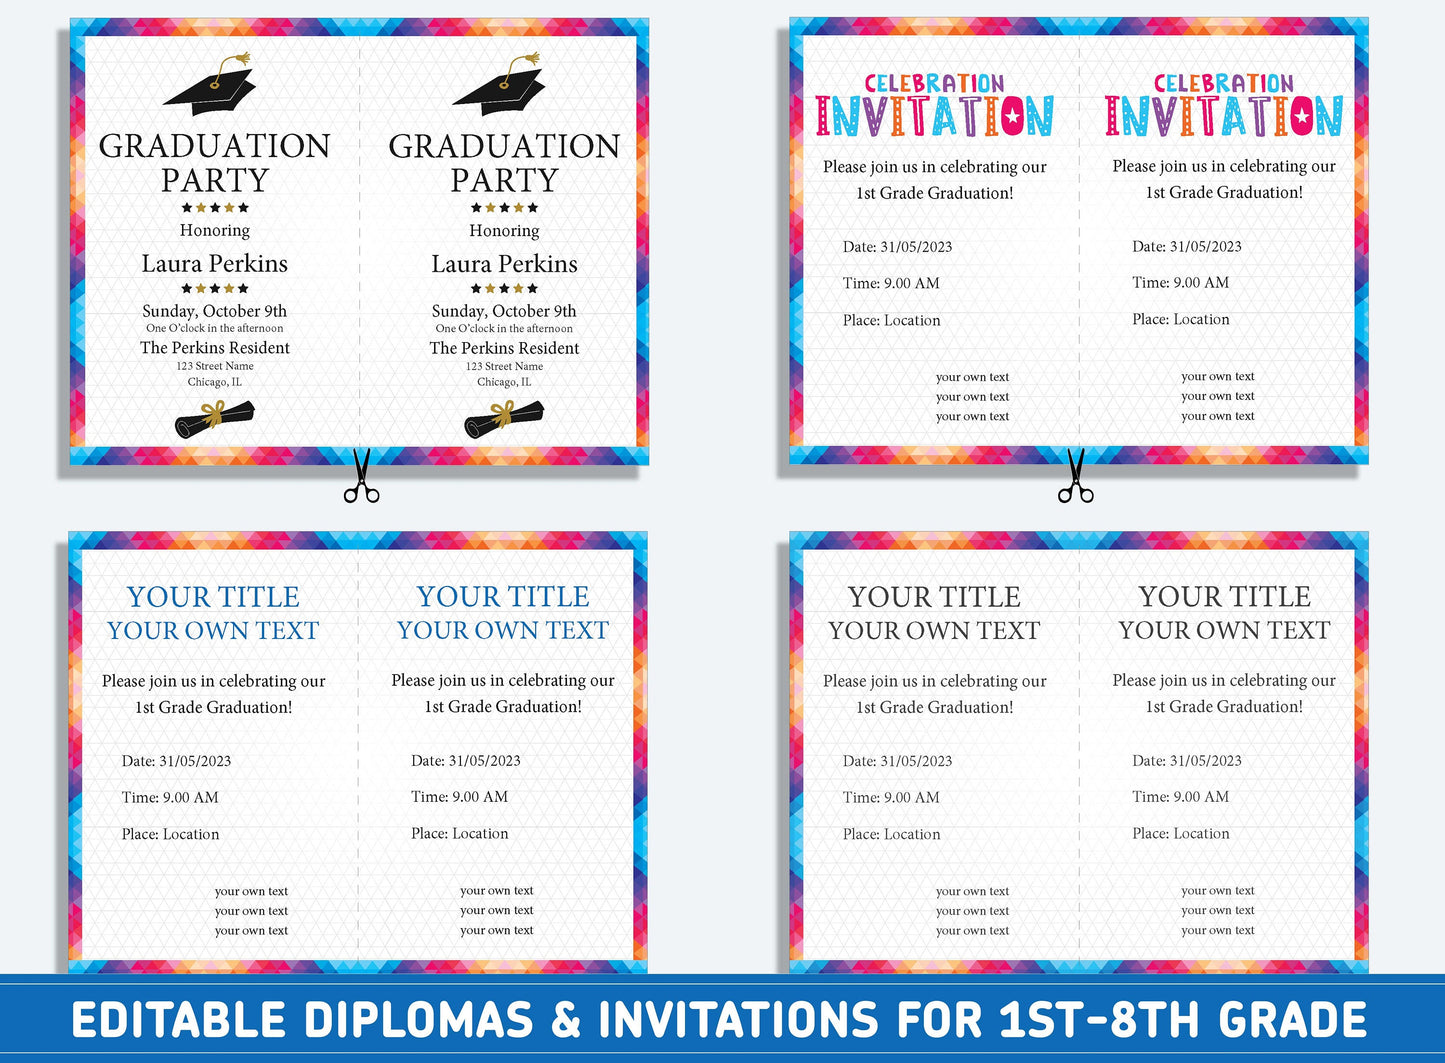 Editable Sixth Grade Diploma, 1st to 8th Grade Diploma, Certificate of Completion & Invitation, PDF File, Instant Download